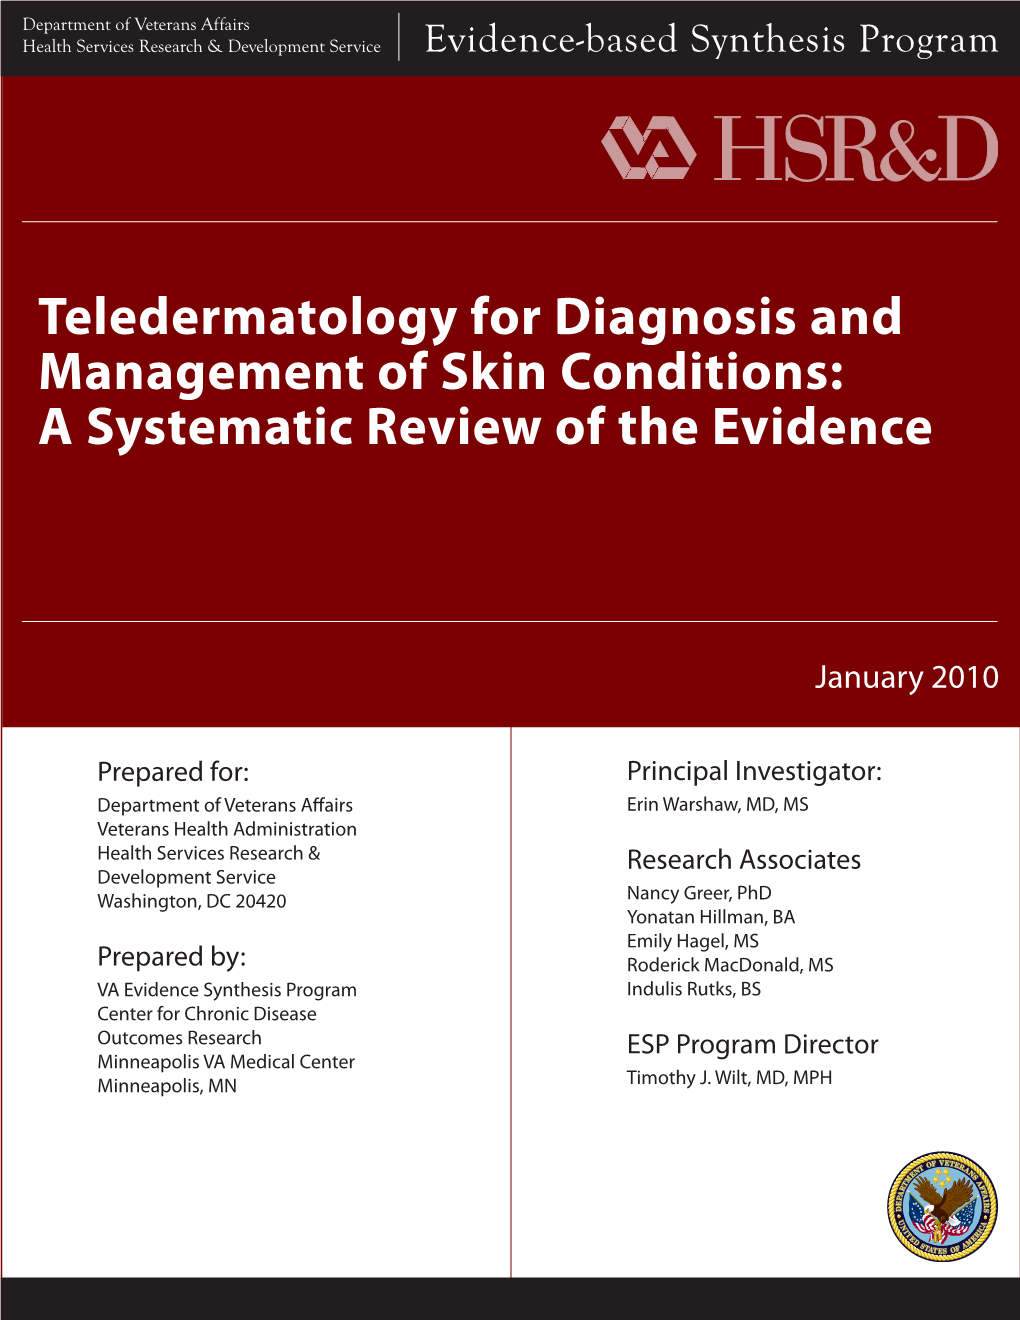 Teledermatology for Diagnosis and Management of Skin Conditions: a Systematic Review of the Evidence